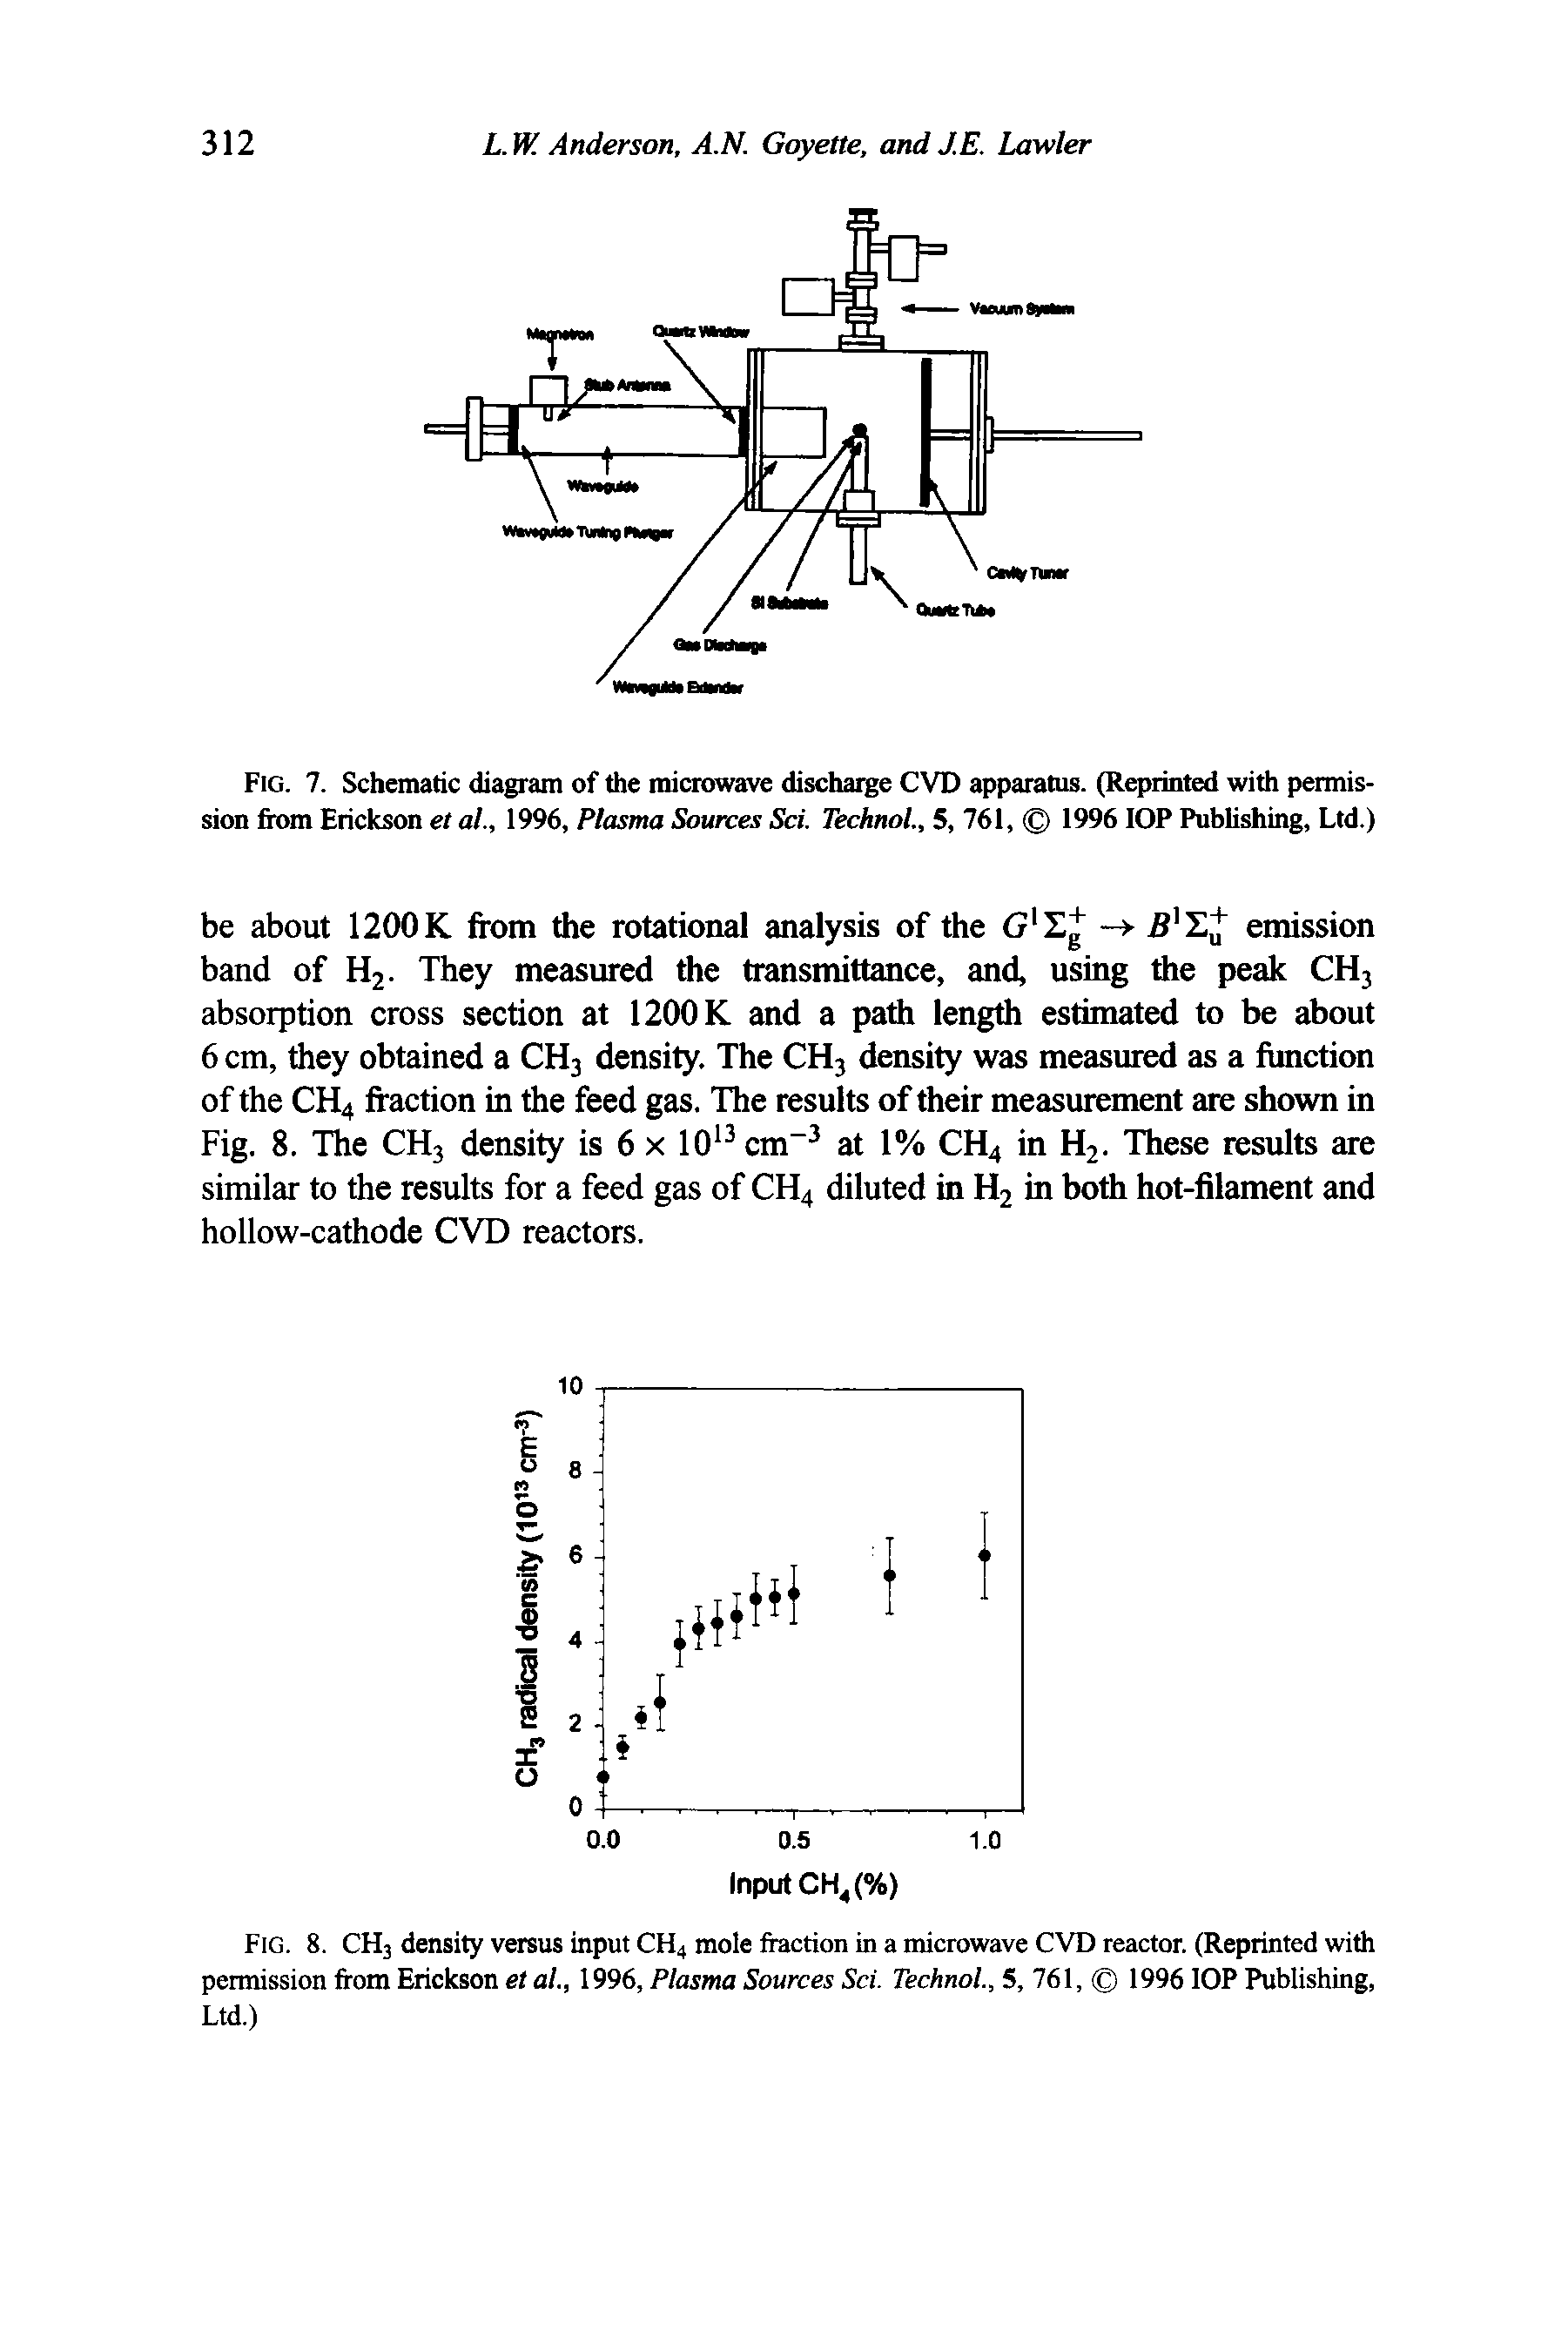 Fig. 8. CH3 density versus input CH4 mole ftaction in a microwave CVD reactor. (Reprinted with permission from Erickson et al., 1996, Plasma Sources Sci. Technol., 5, 761, 1996 lOP Publishing, Ltd.)...